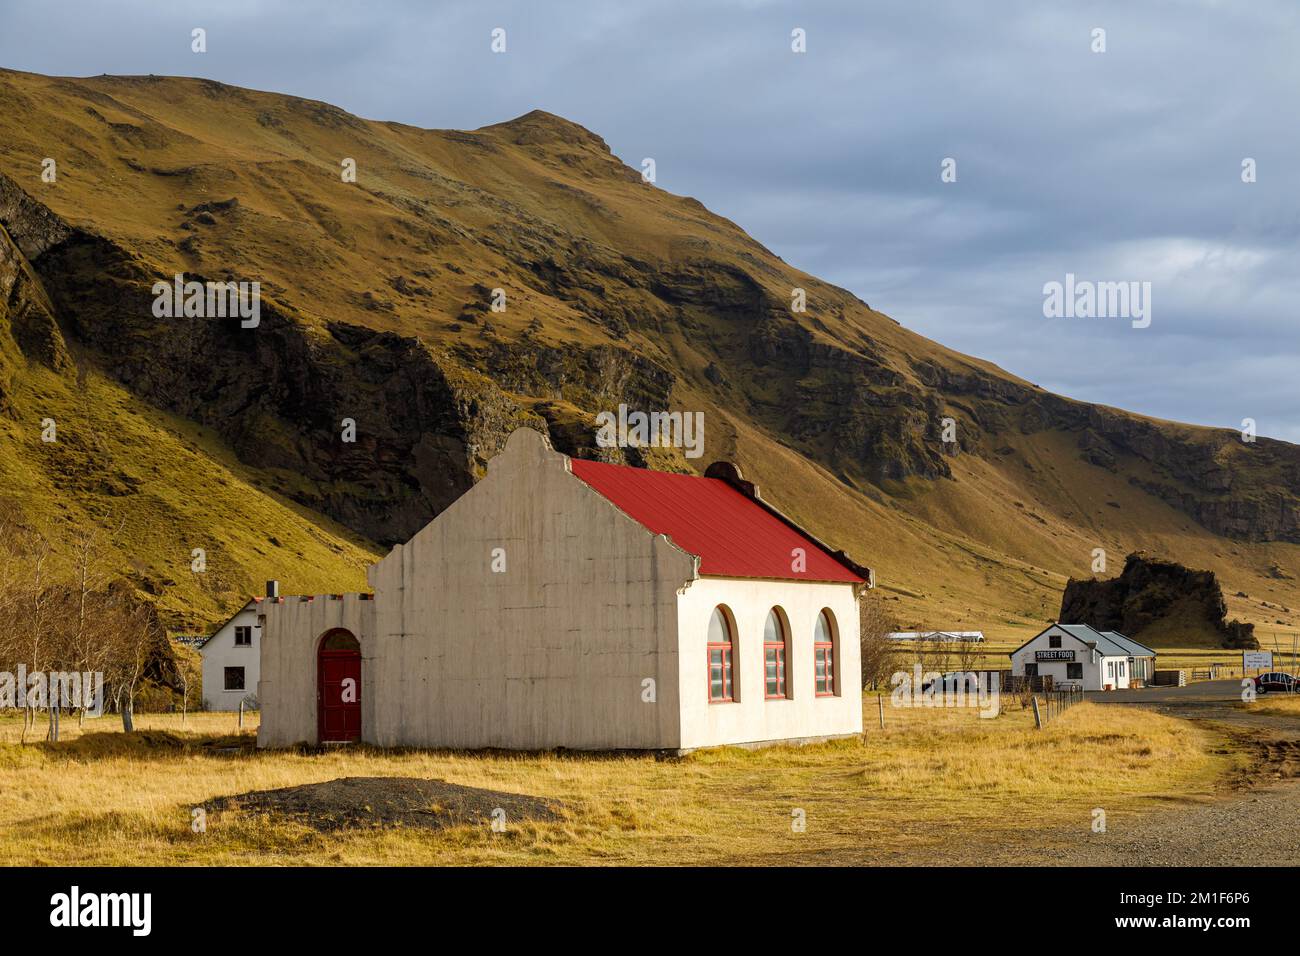 Typical small hotel and street food in the characteristic architectural style of Iceland Stock Photo